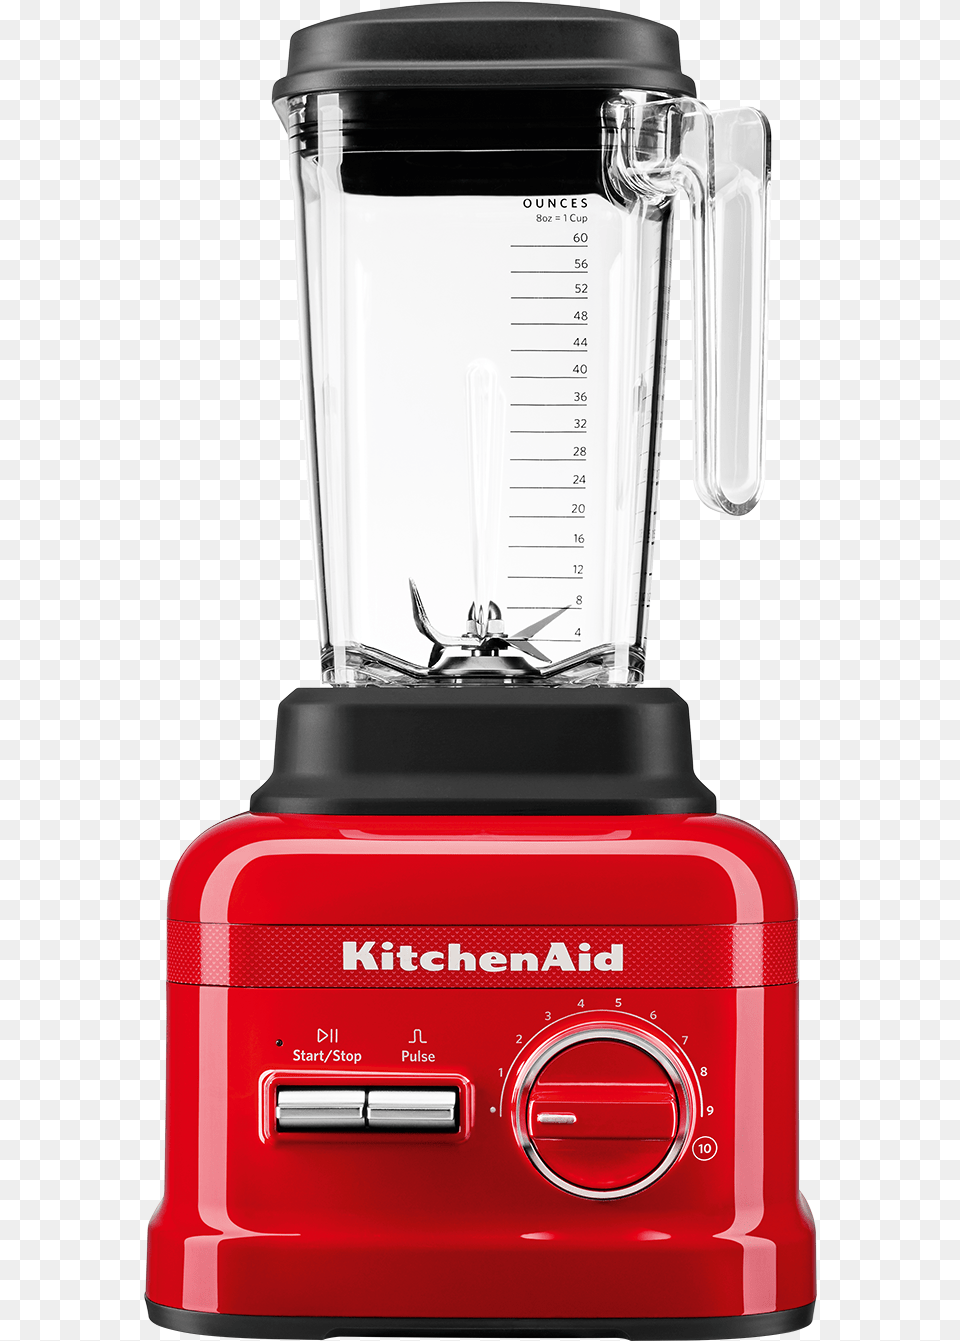 Kitchenaid Queen Of Hearts Power Blender Review, Appliance, Device, Electrical Device, Mixer Free Transparent Png